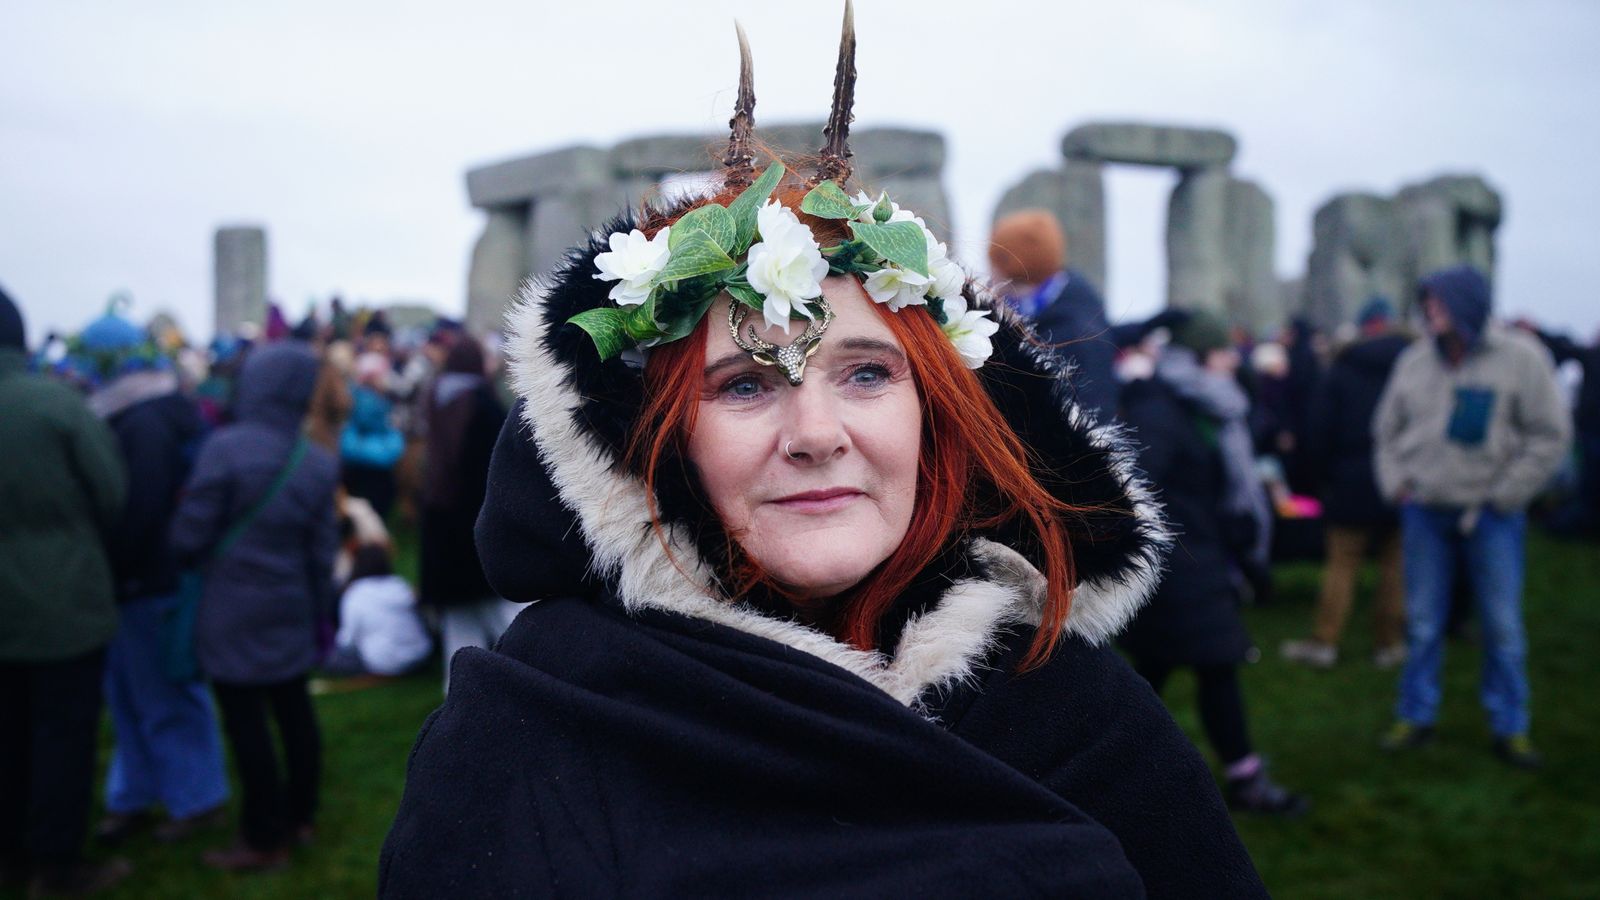 Crowds gather at Stonehenge for winter solstice - as police issue roads warning